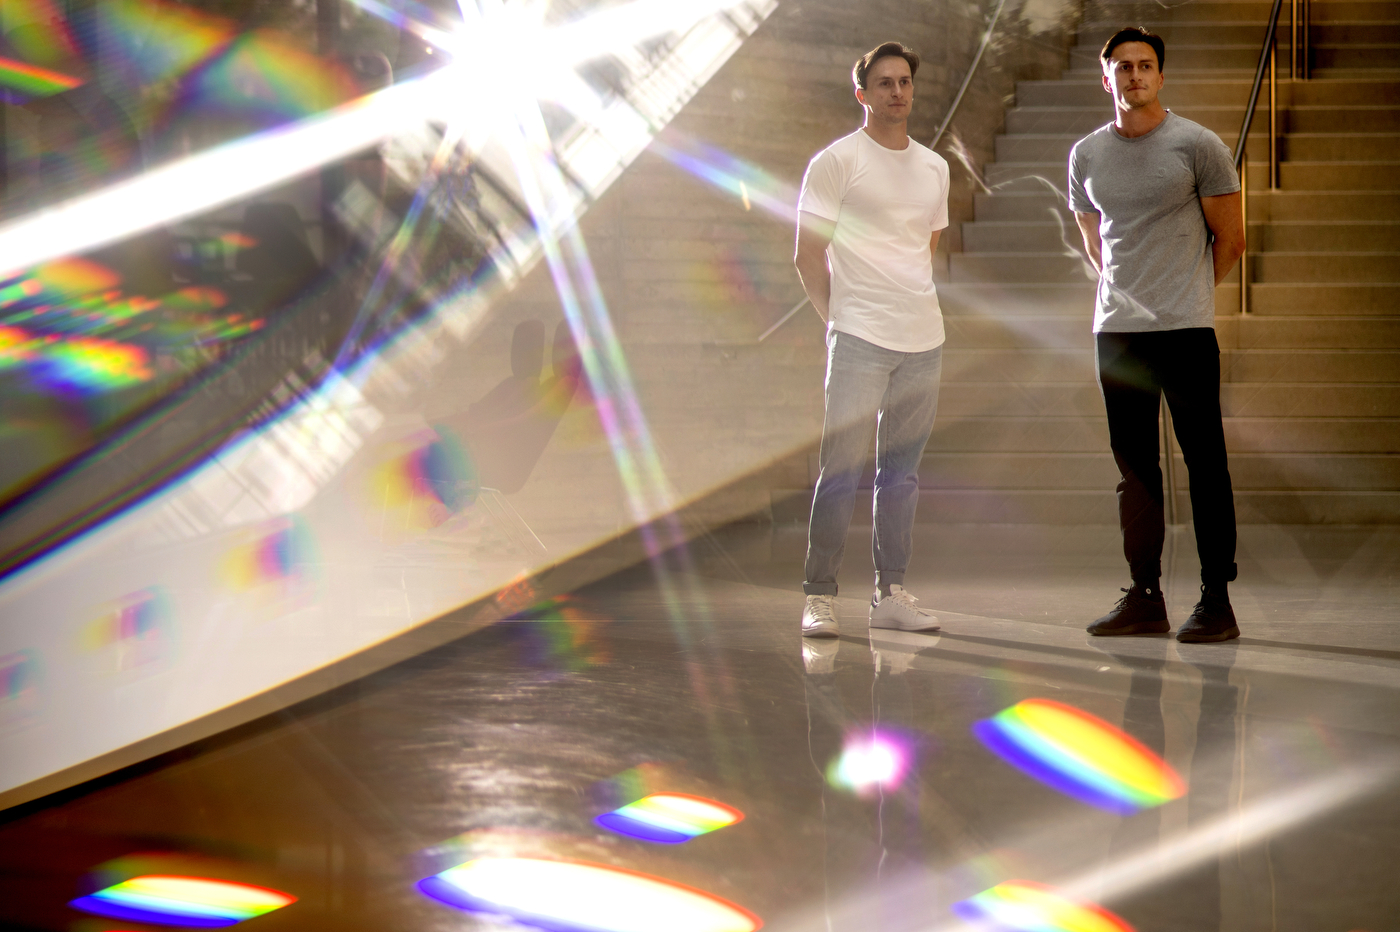 Jake and Jared Covell standing in an open, modern building, with sunlight catching and making rainbows